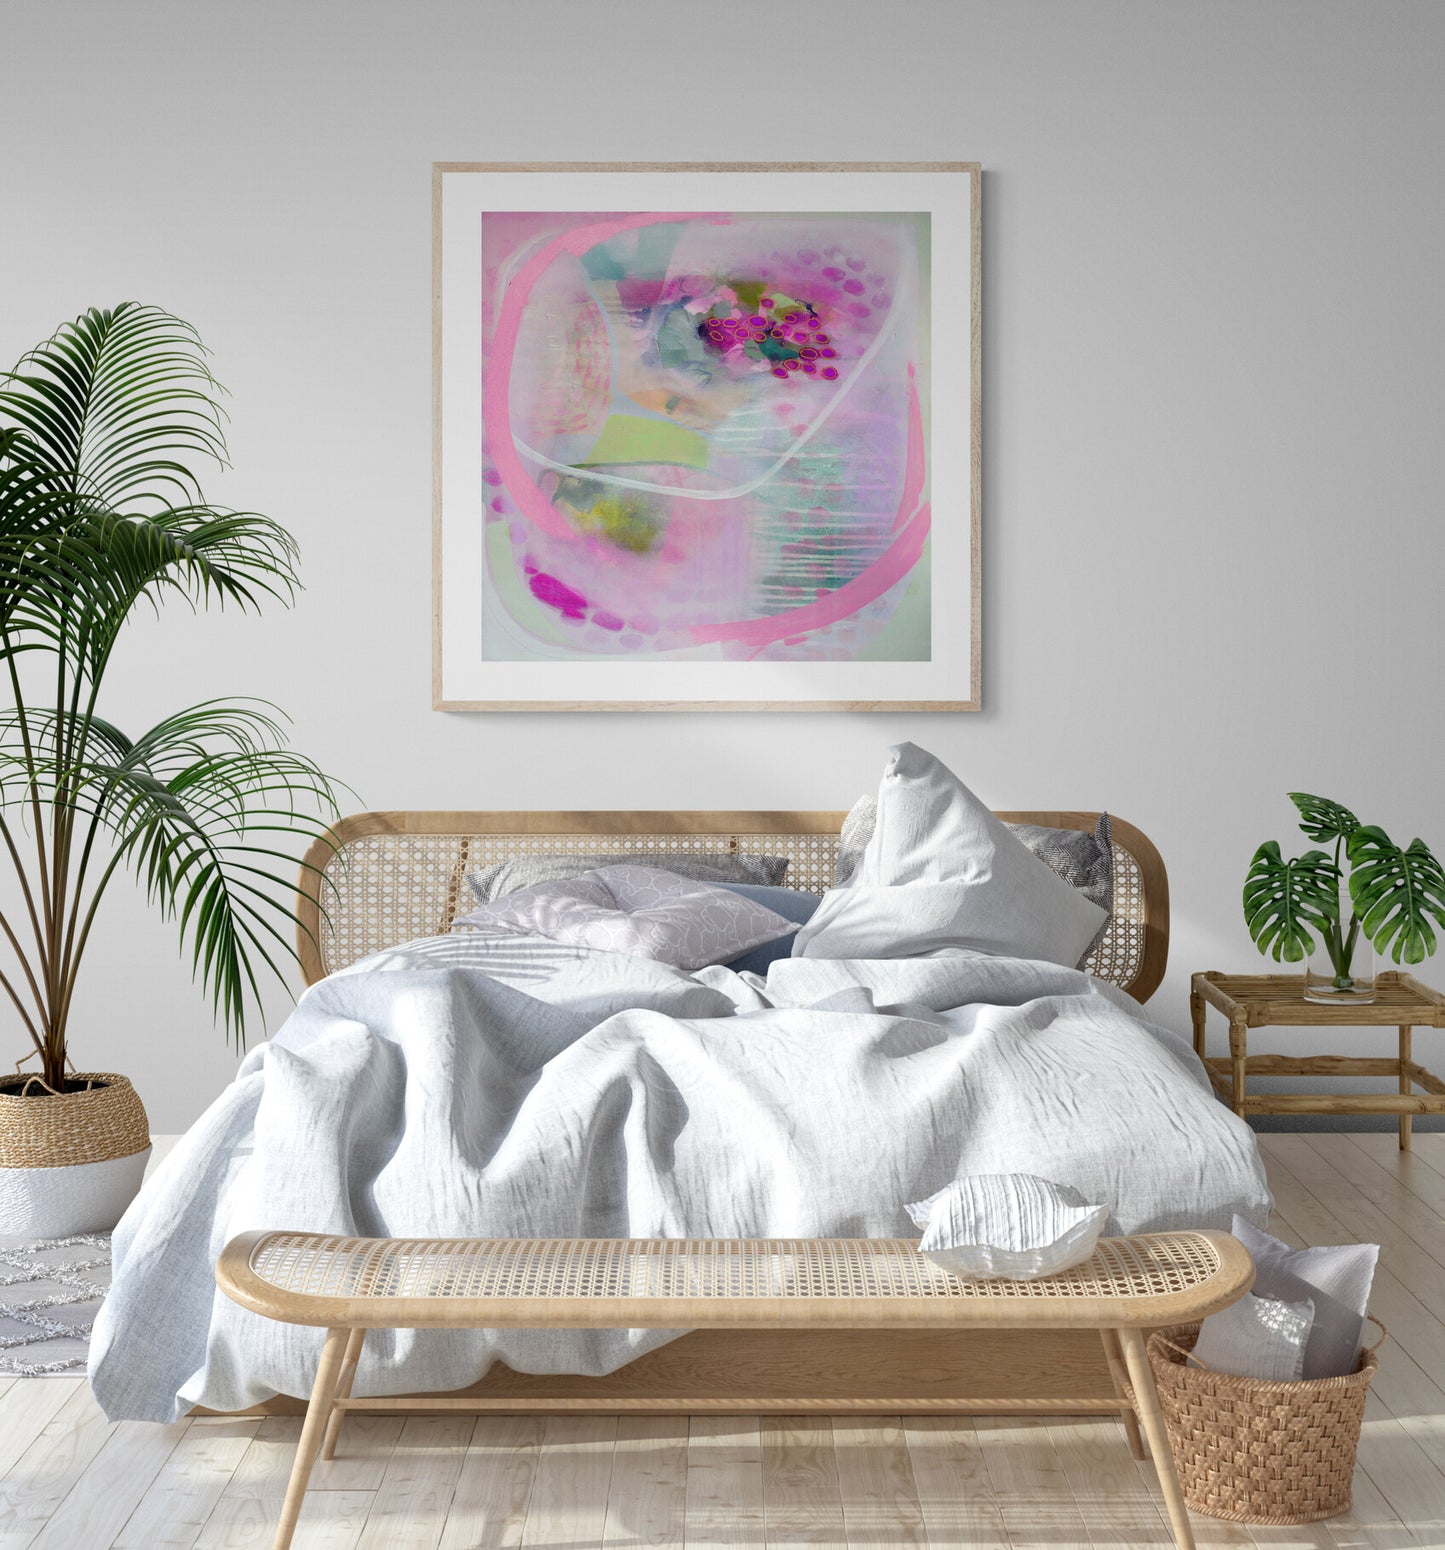 Pink Abstract Art Giclee Print on Stretched Canvas or Fine Art Paper